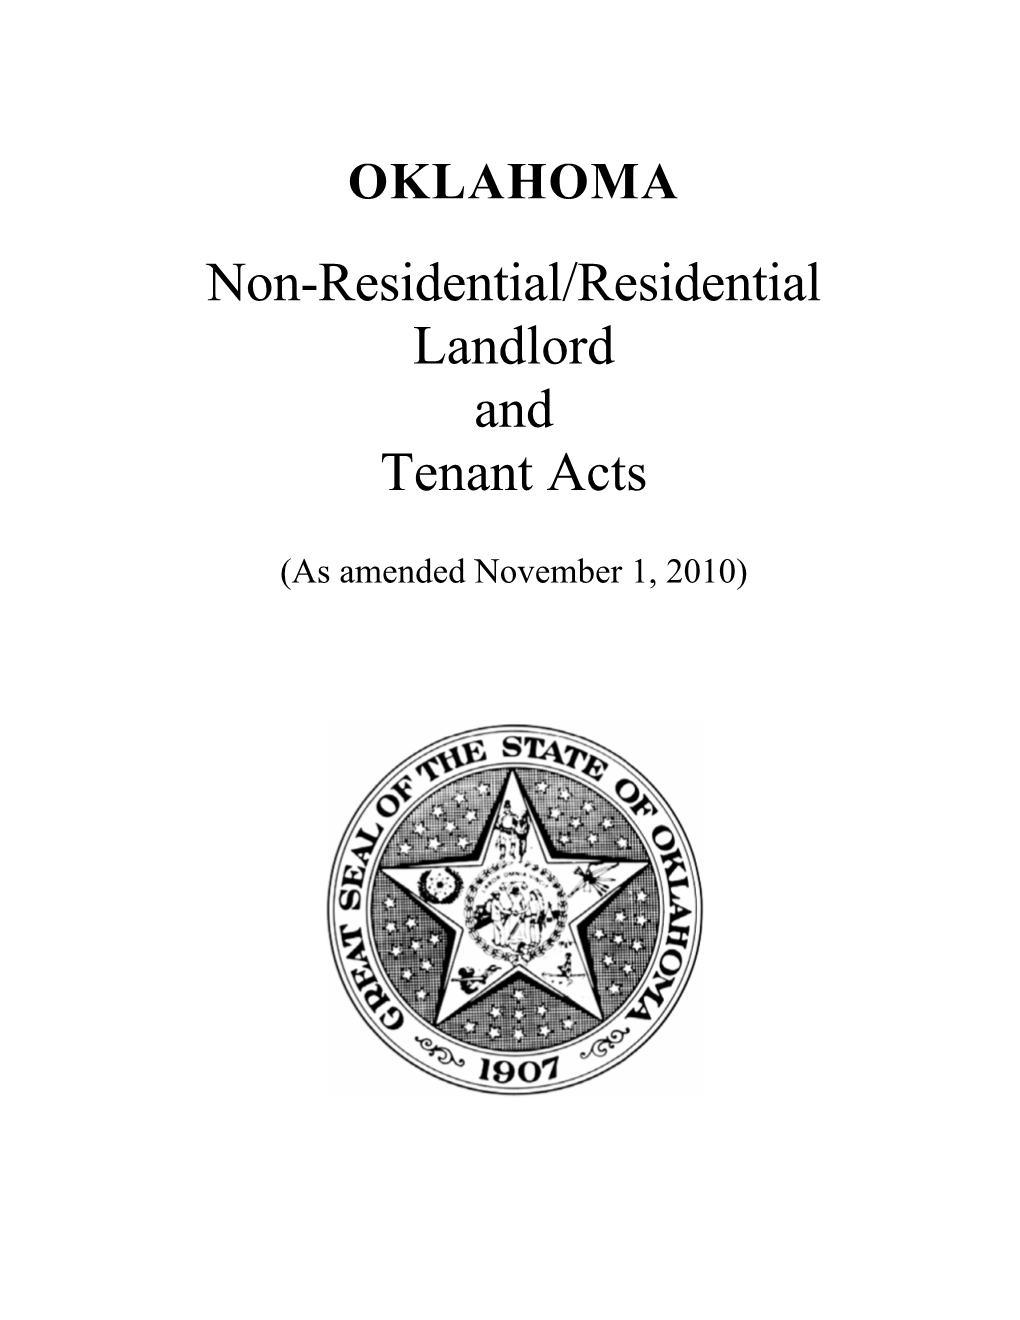 Non-Residential/Residential Landlord and Tenant Acts